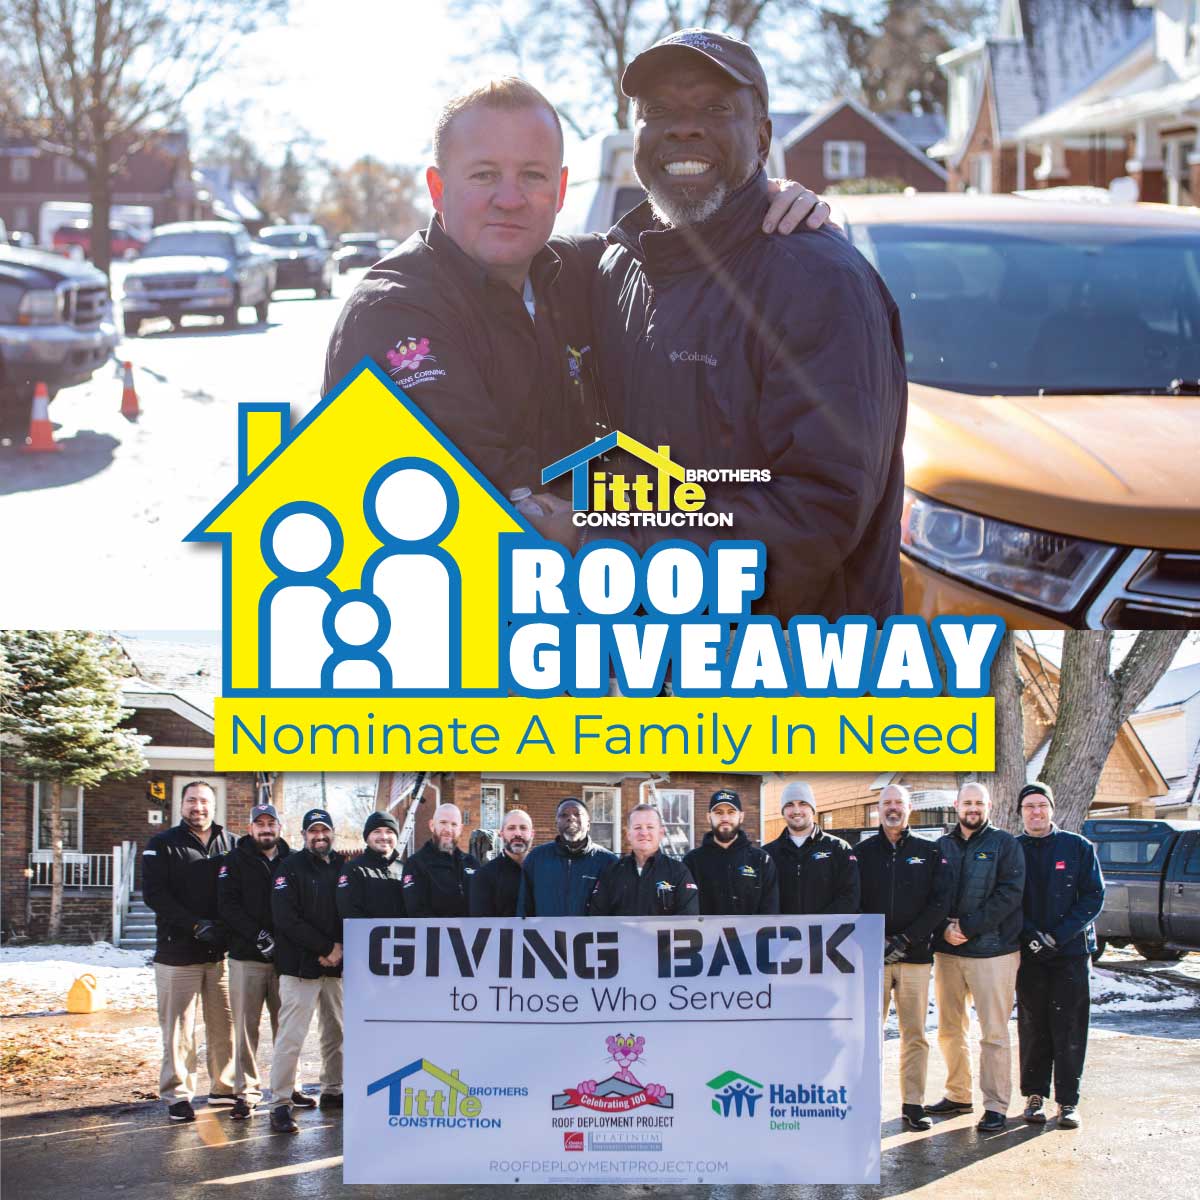 giving back - nominate family in need for a new roof